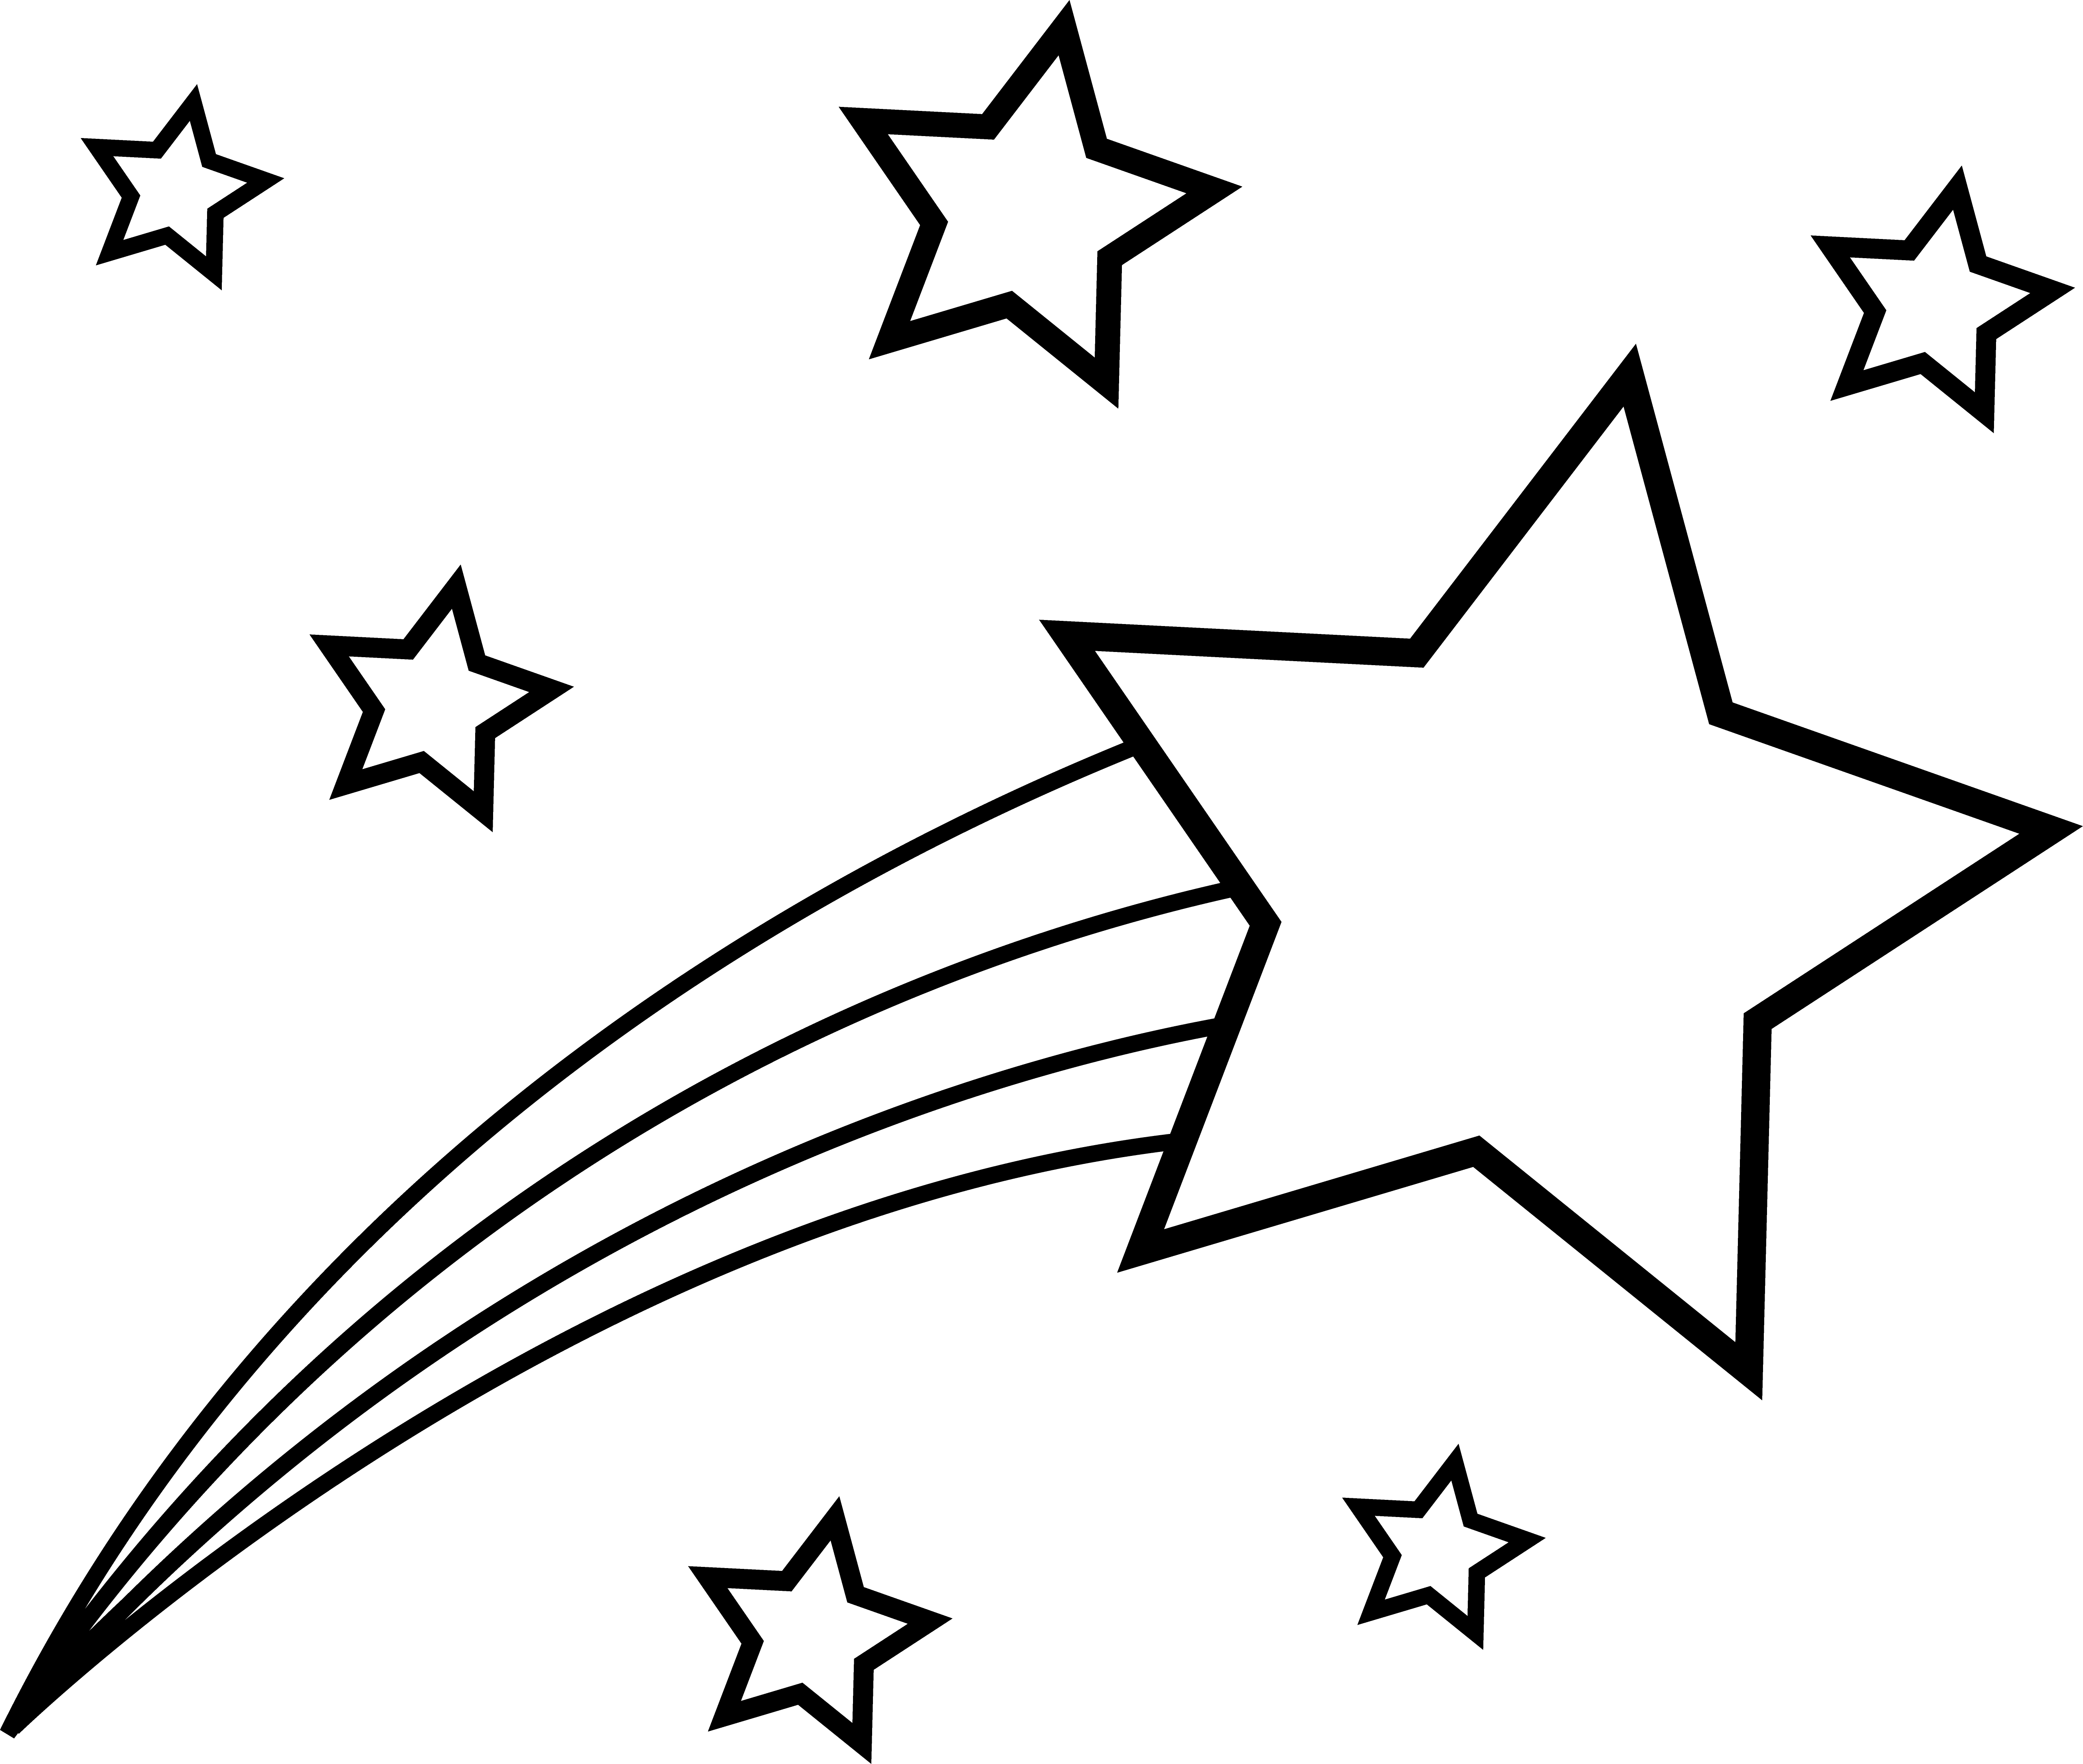 Shooting Star Clipart on .